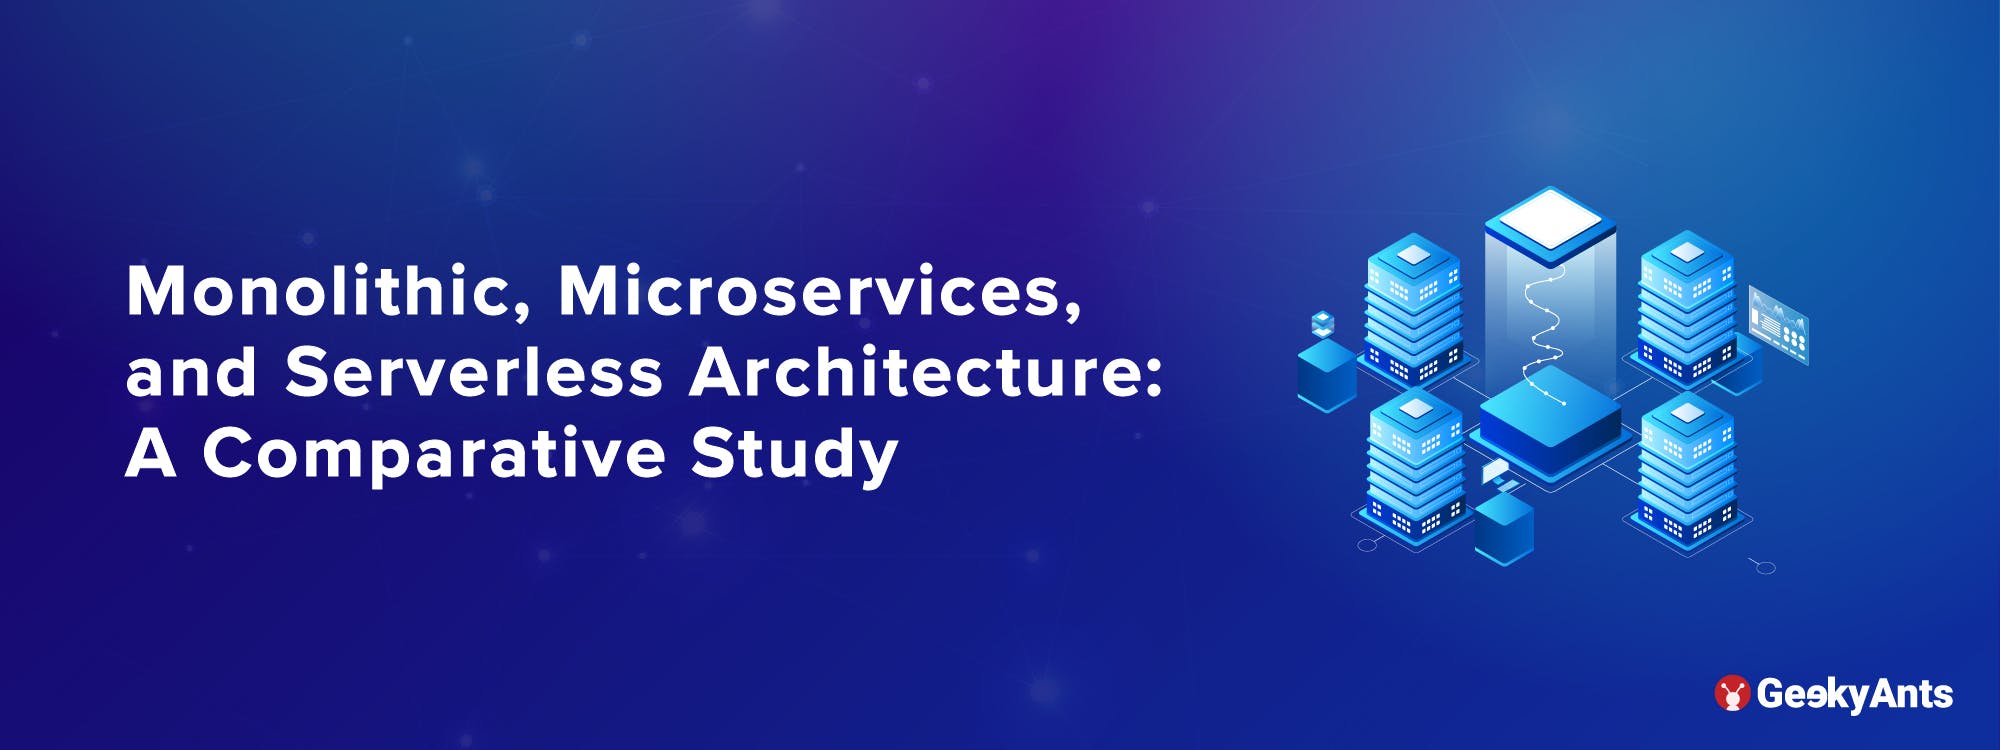 Monolithic, Microservices, and Serverless Architecture : A Comparative Study